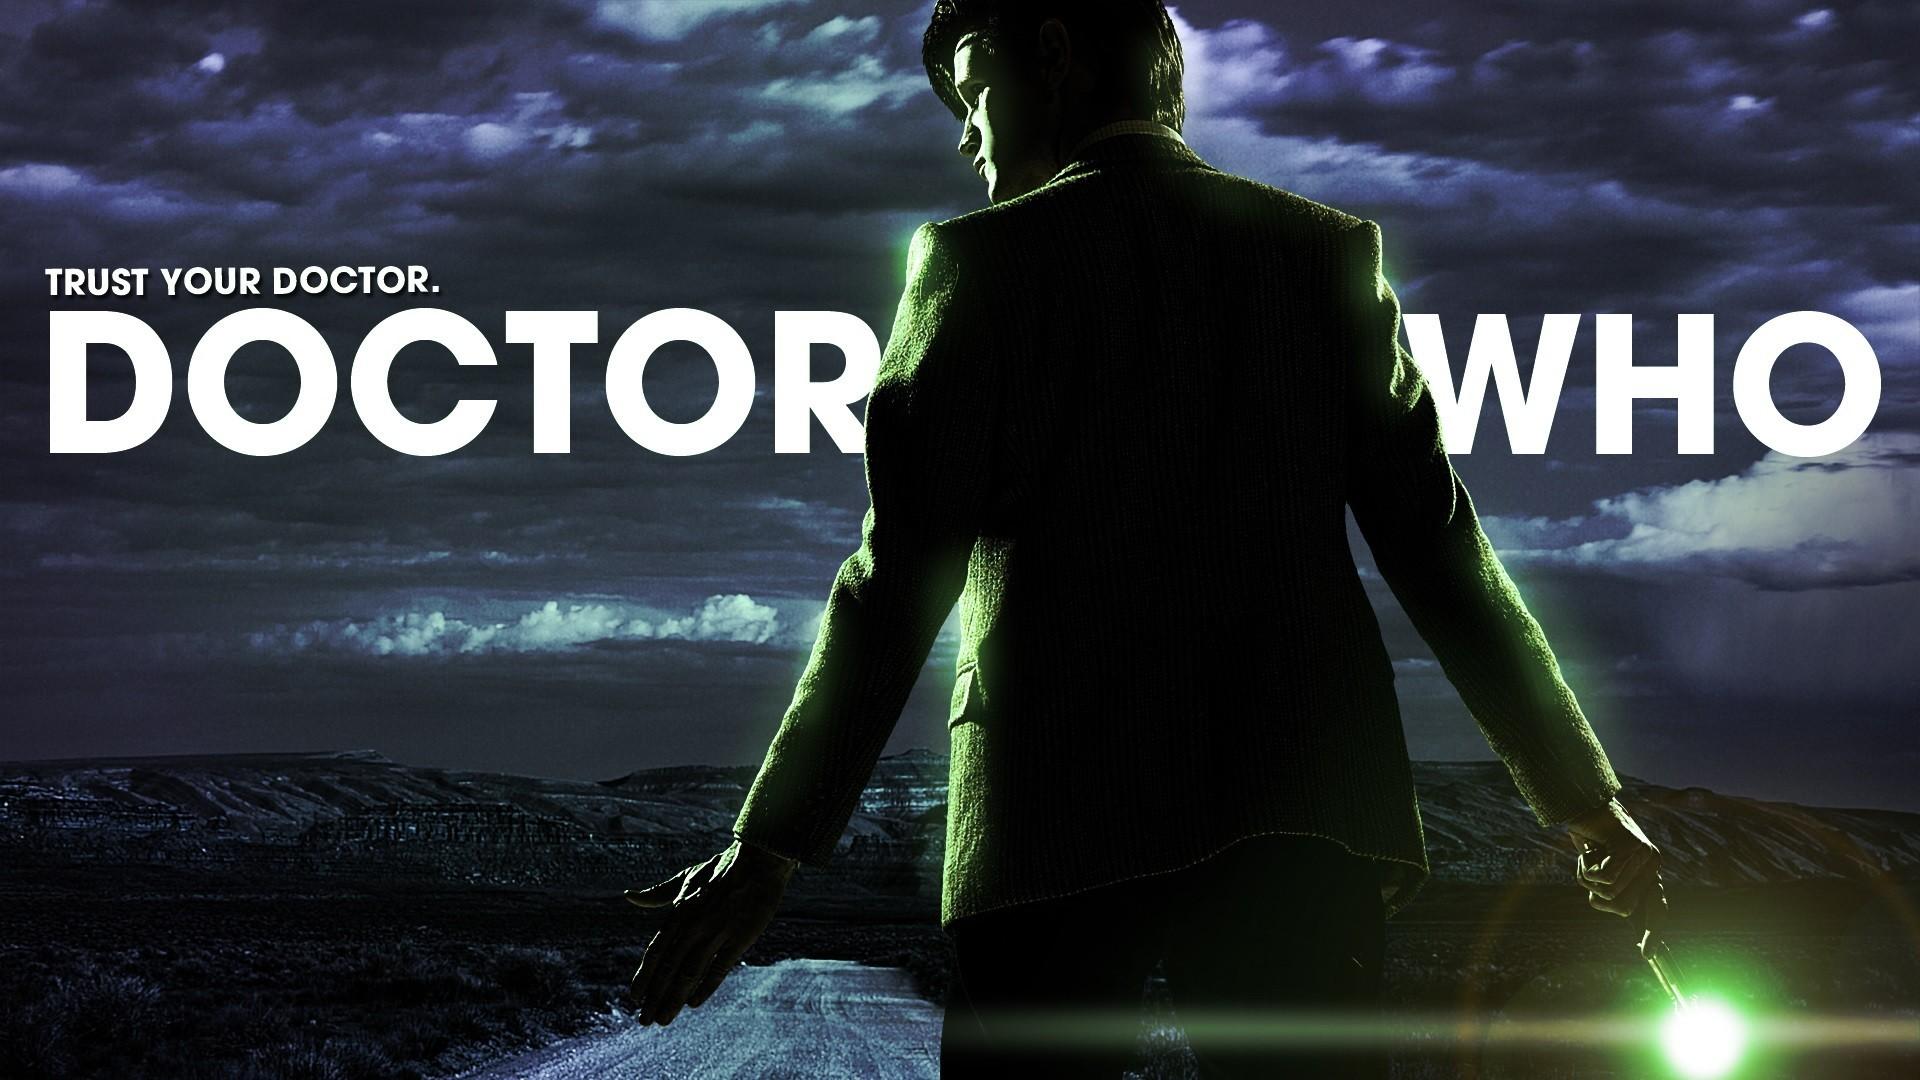 doctor who wallpaper,sky,movie,digital compositing,fictional character,games